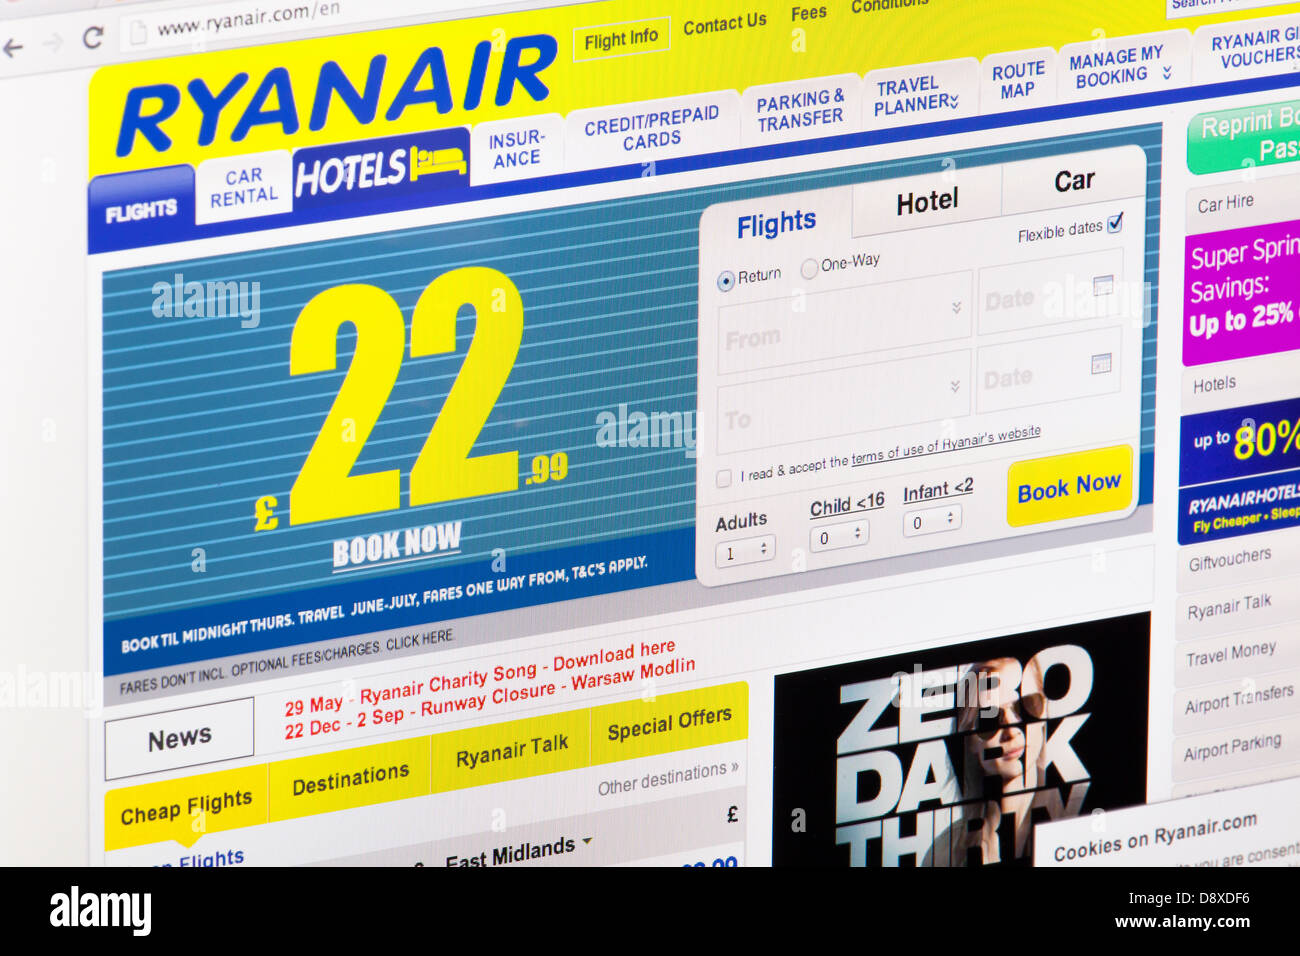 Ryanair Cheap Flights Website or web page on a laptop screen or computer monitor Stock Photo